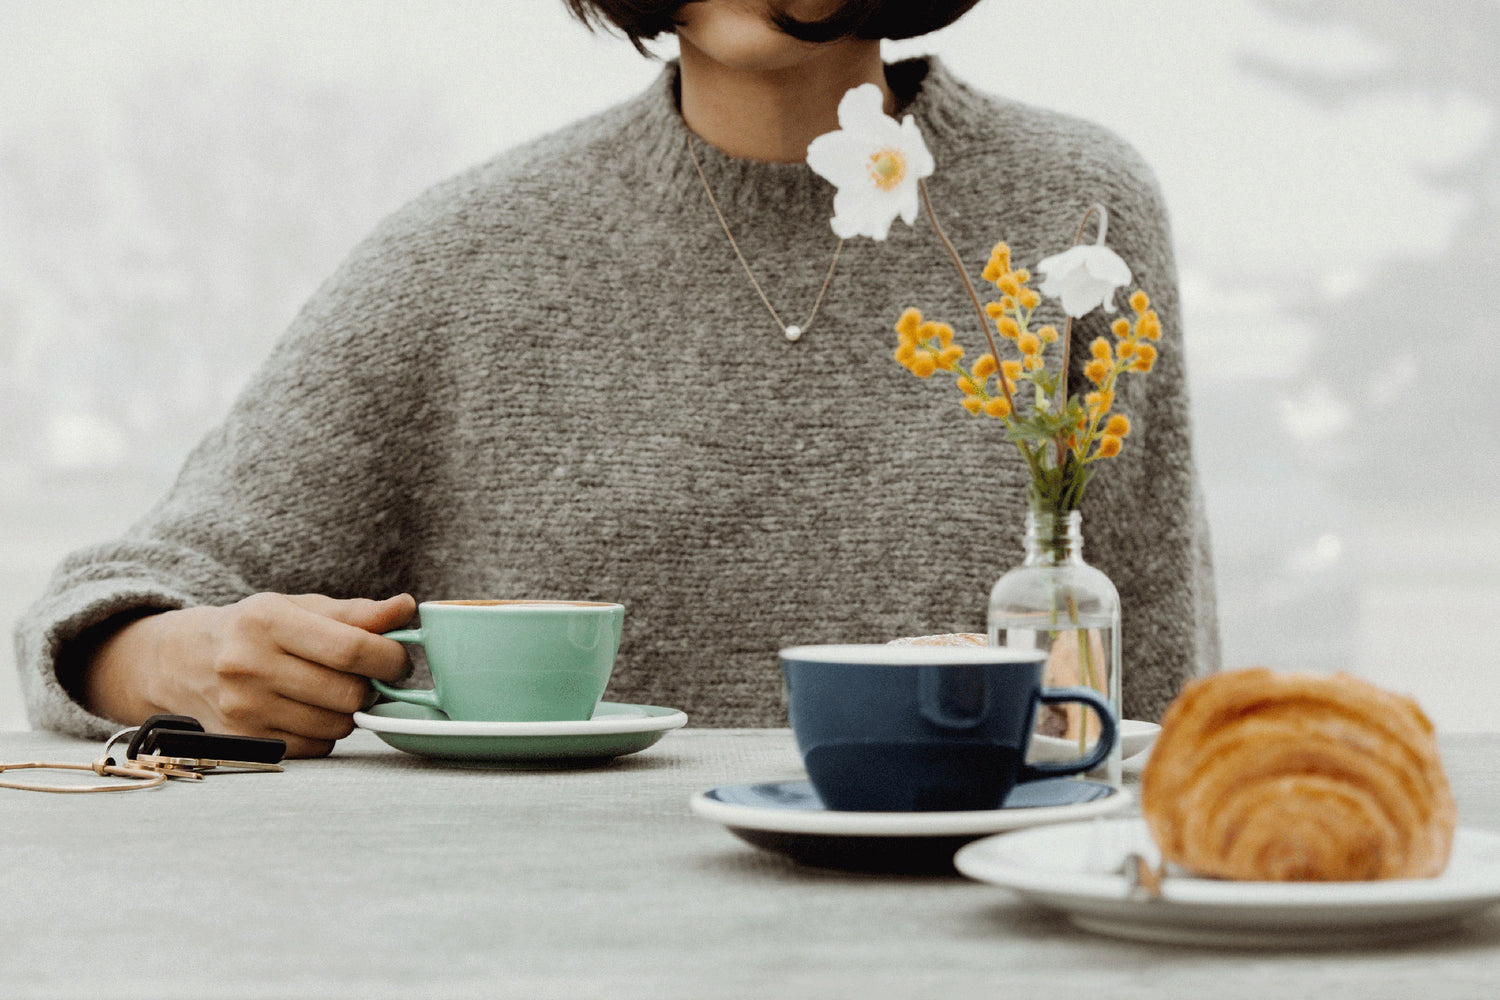 Woman with grey sweater holding a Feijoa Acme cappuccino cup